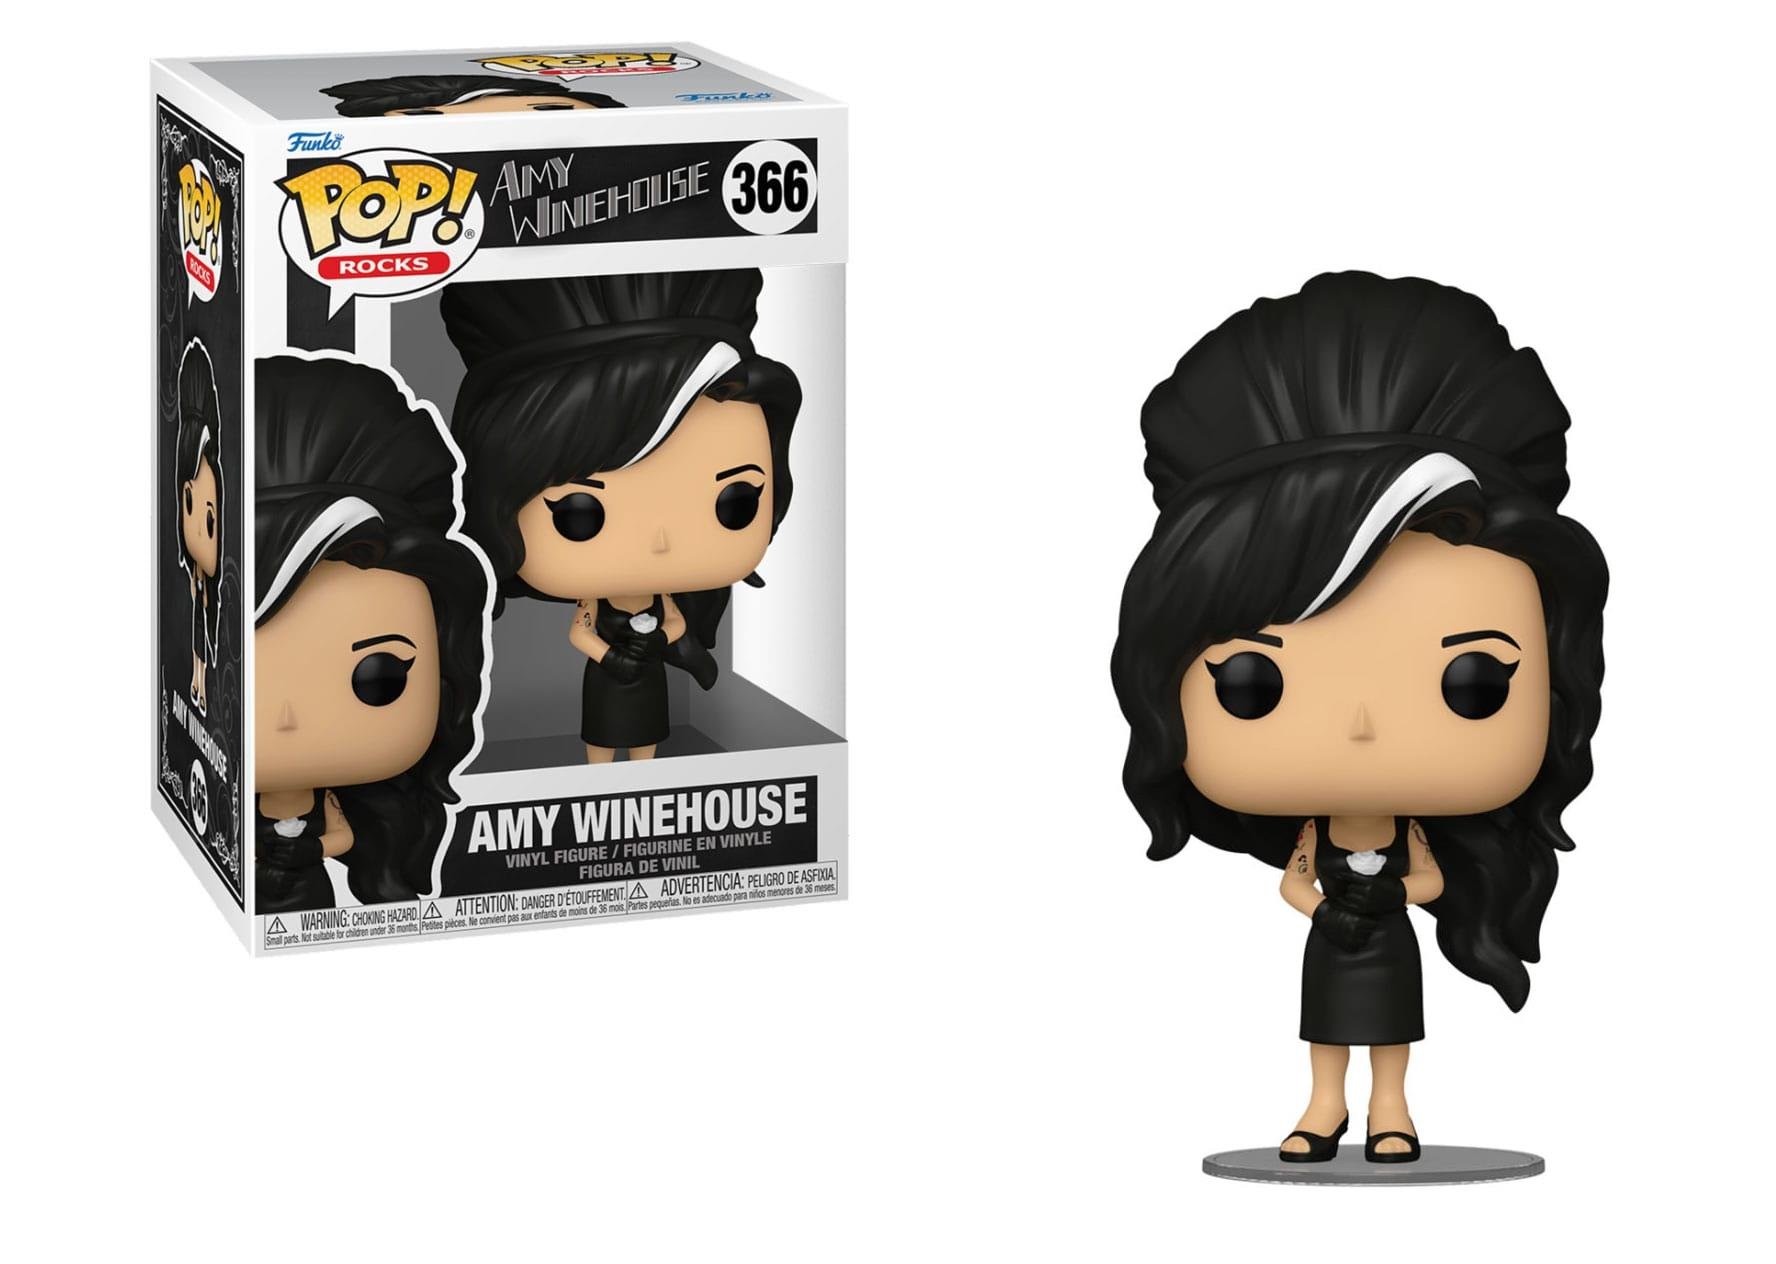 Vinyl Therapy Sessions: Funko Pop! Rocks Amy Winehouse 366 #funkopop # amywinehouse 